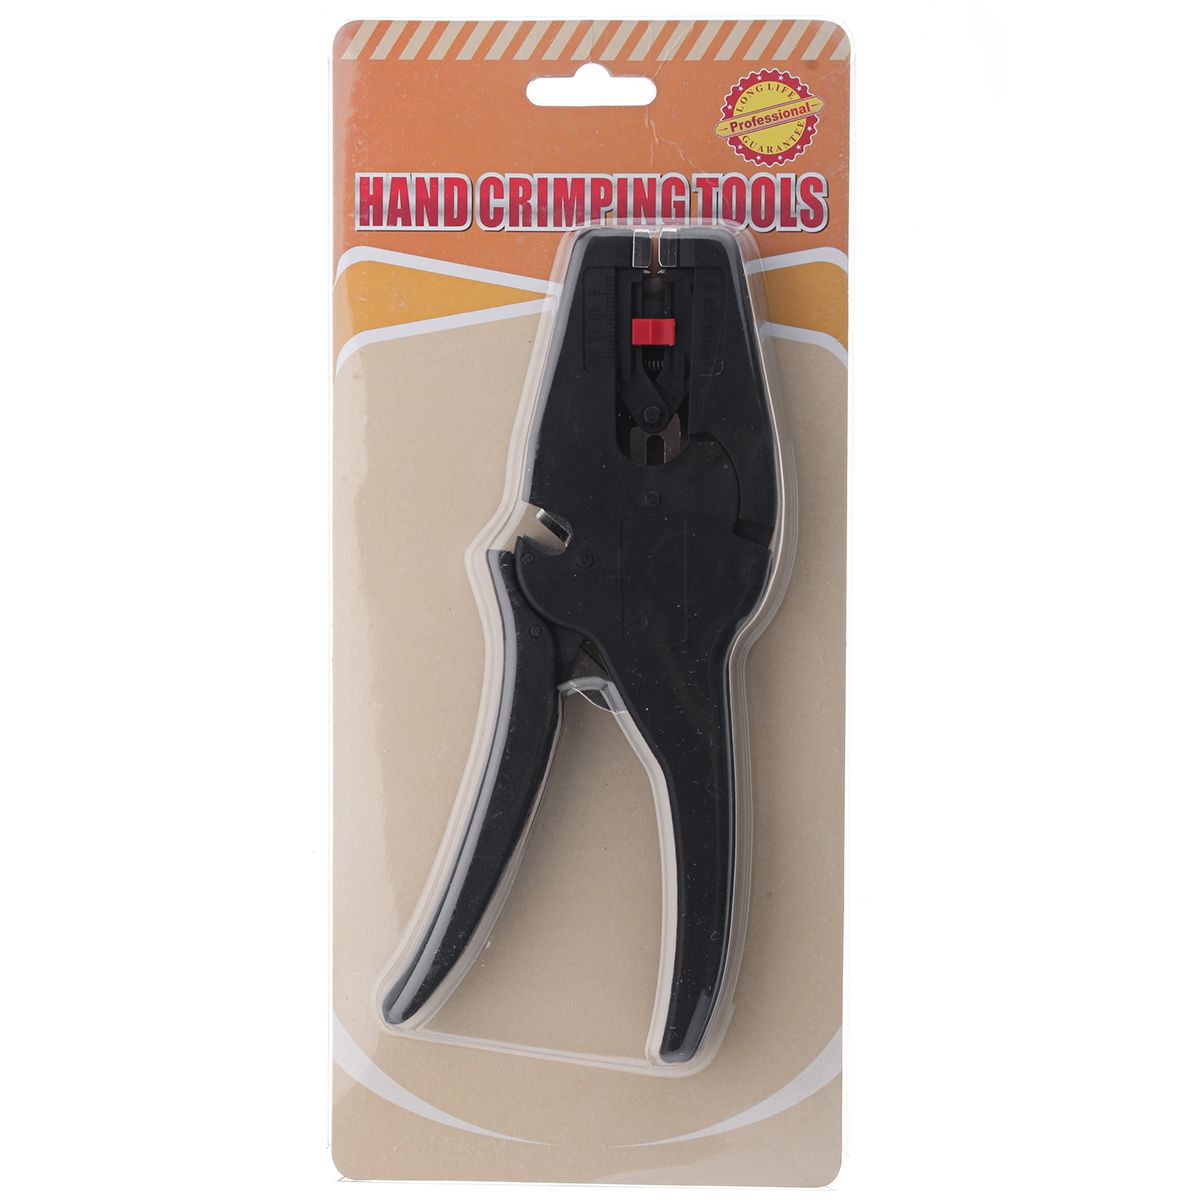 Multifunctional-Adjustable-Electric-Cable-Wire-Crimper-Stripper-Stripping-Plier-003-10mmsup2-1315989